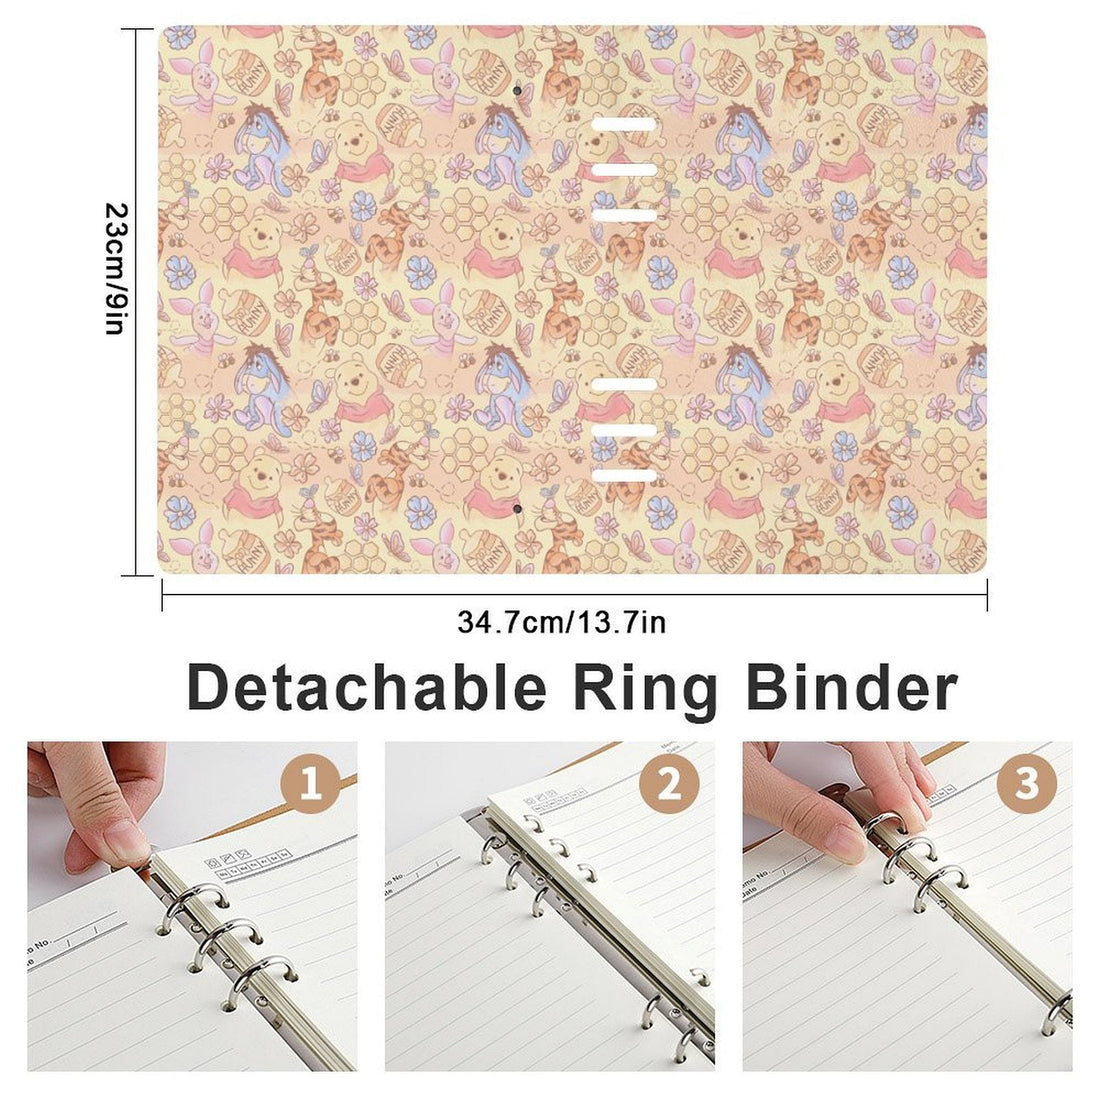 NBC FLORAL-Matching Notebook & Pen Sets Closing 1/5 ETA EARLY MARCH